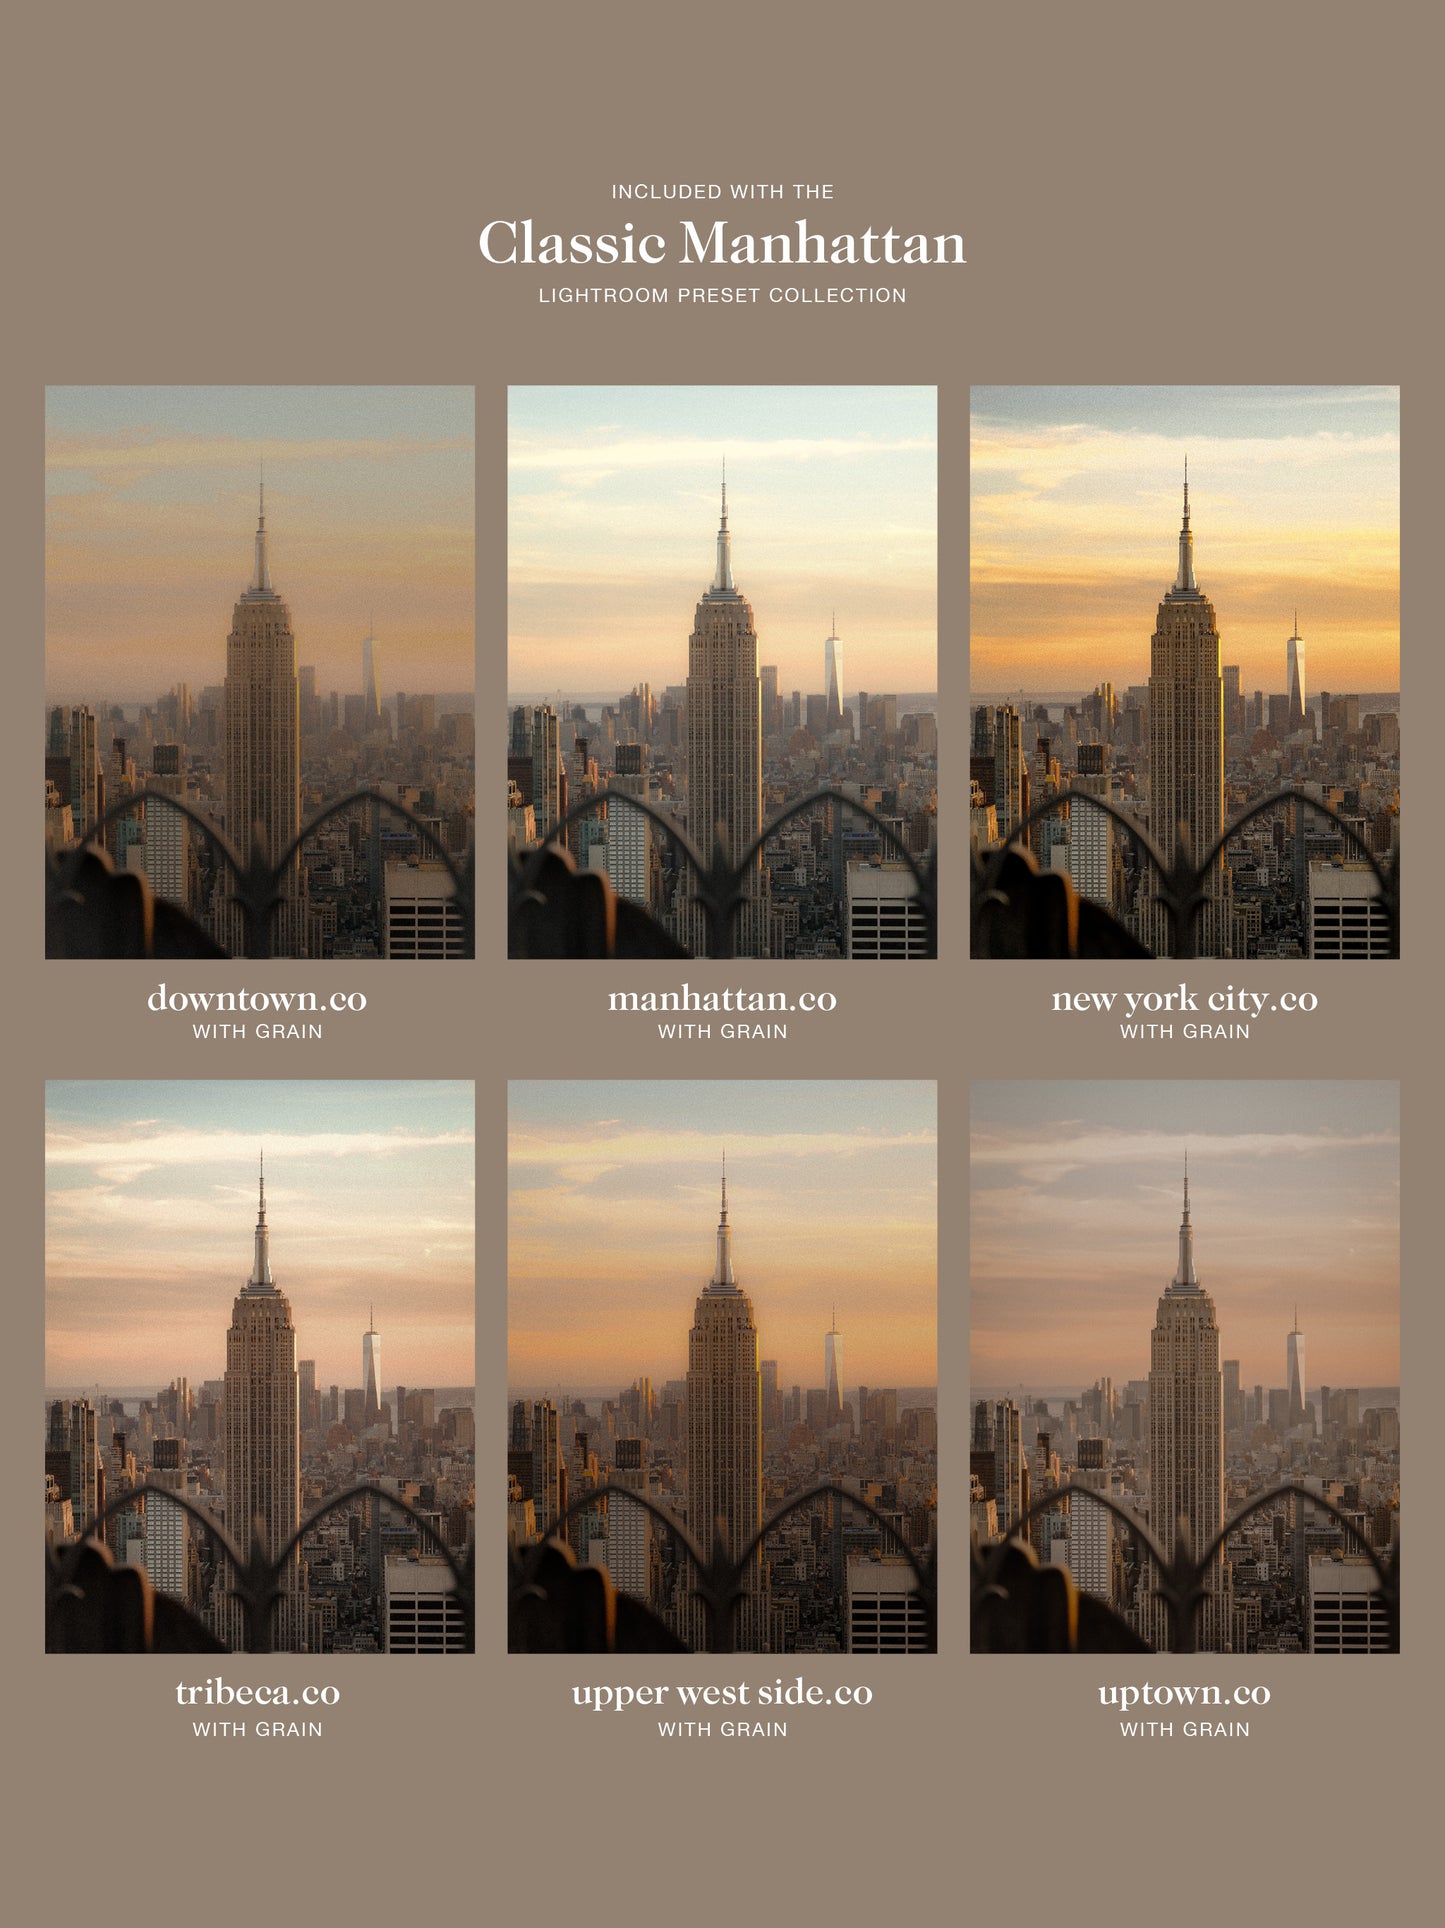 The Complete "Classic Manhattan" Lightroom Preset Collection